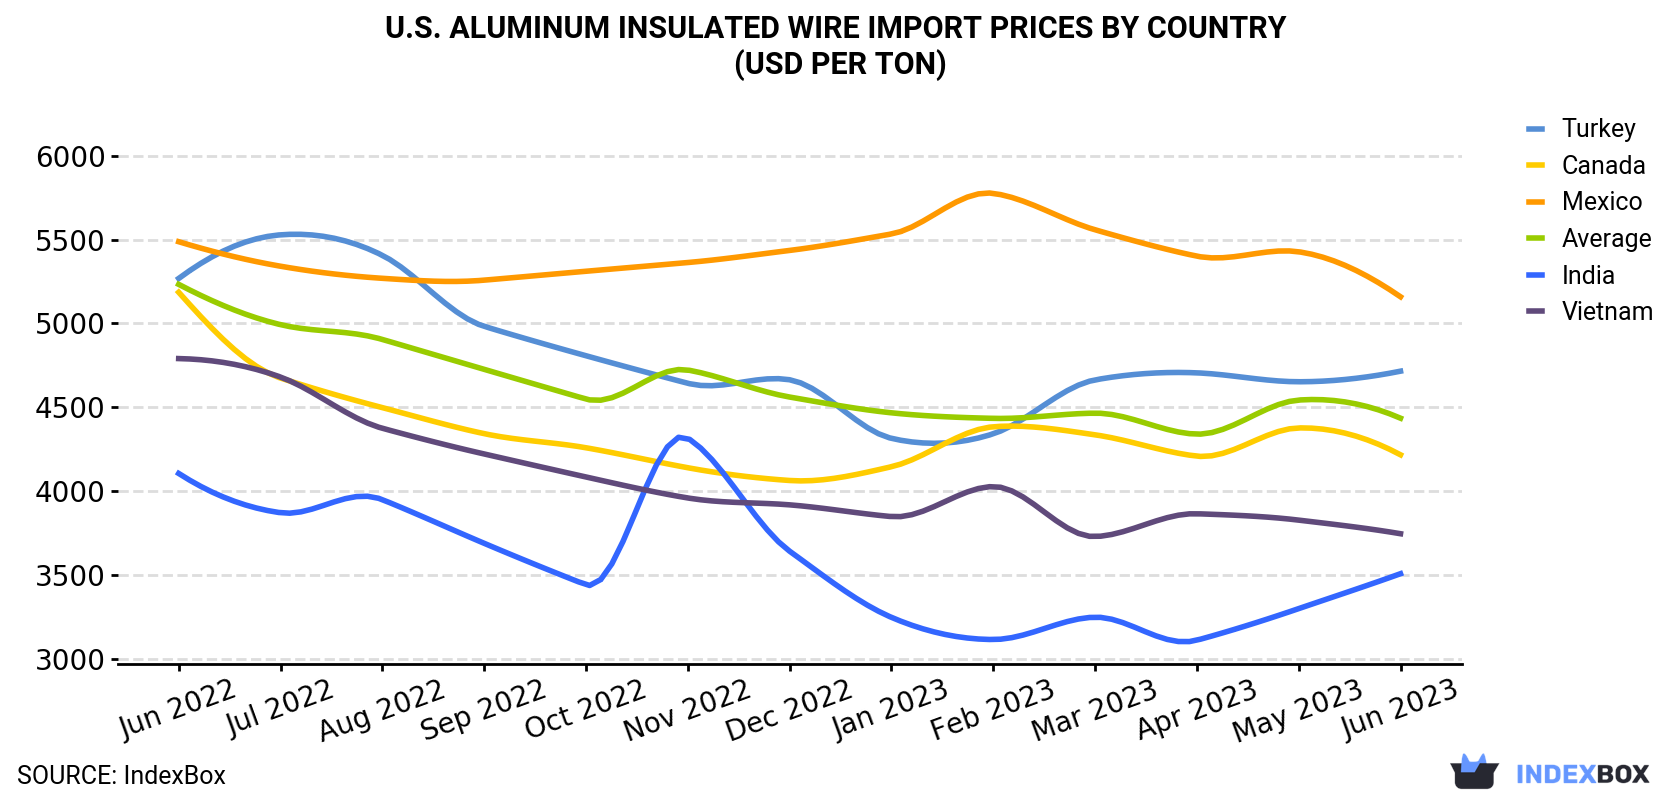 U.S. Aluminum Insulated Wire Import Prices By Country (USD Per Ton)